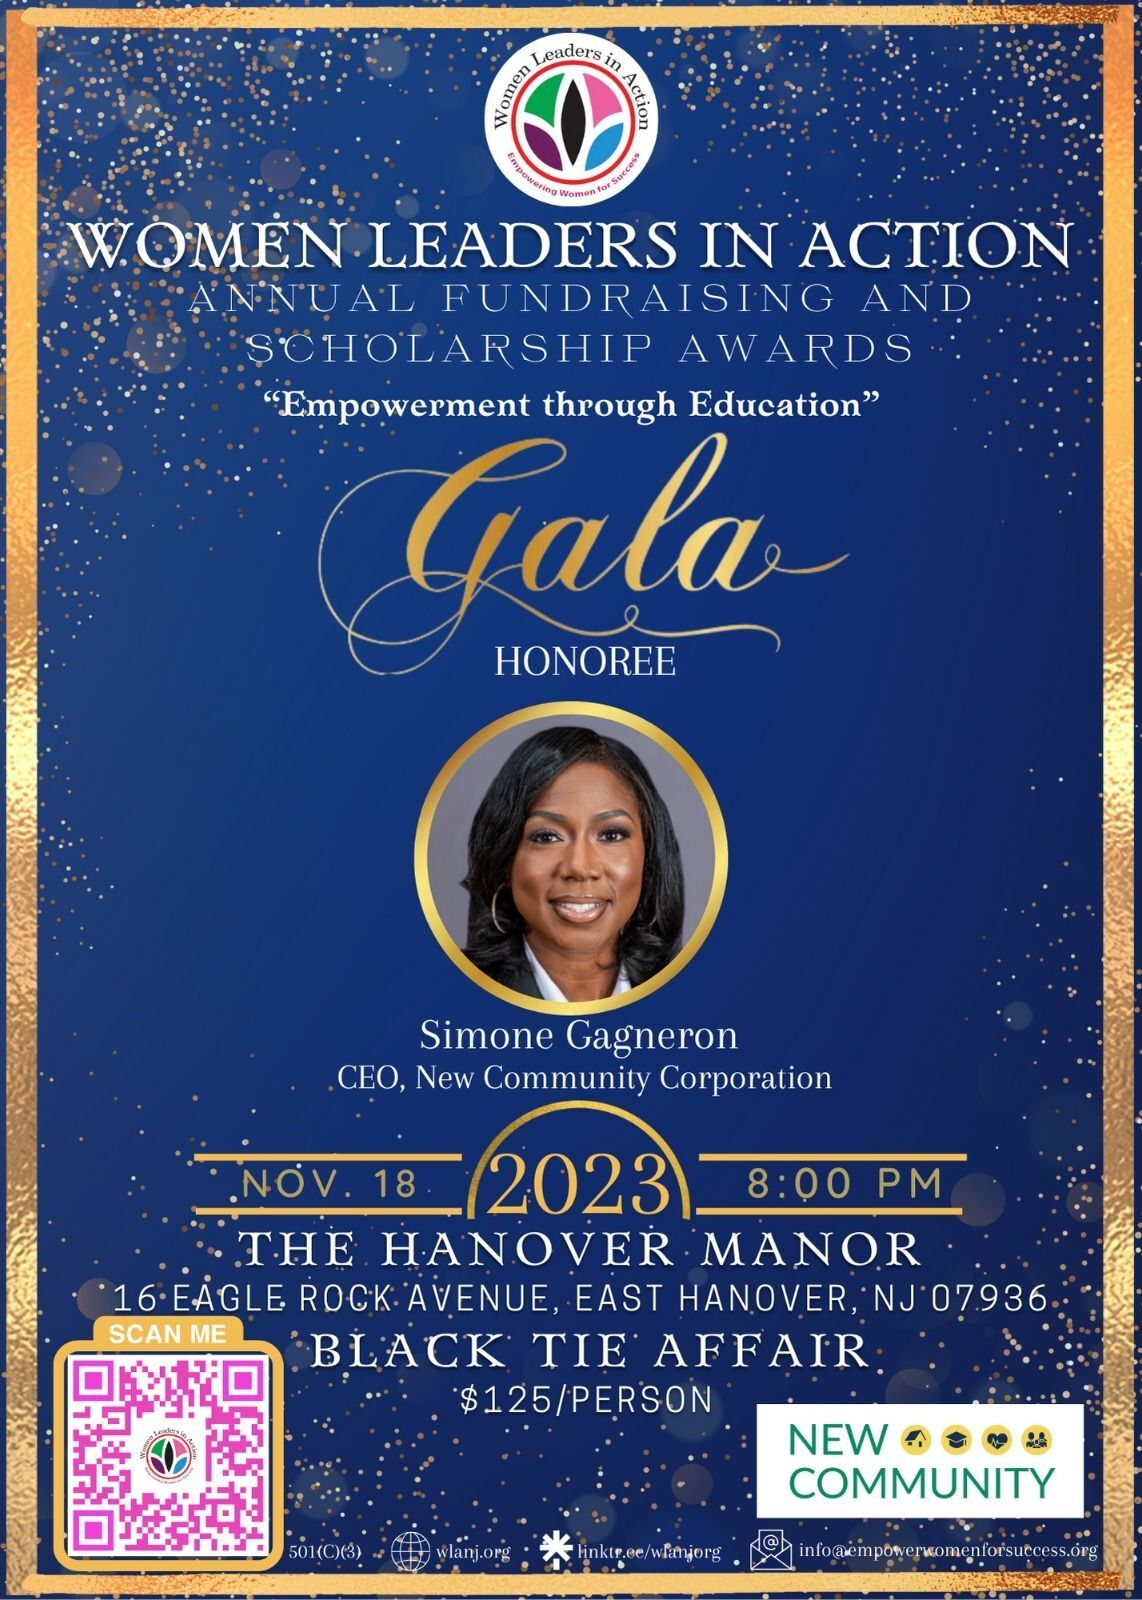 2023 W.L.A. Annual Fundraising and Scholarship Awards Gala